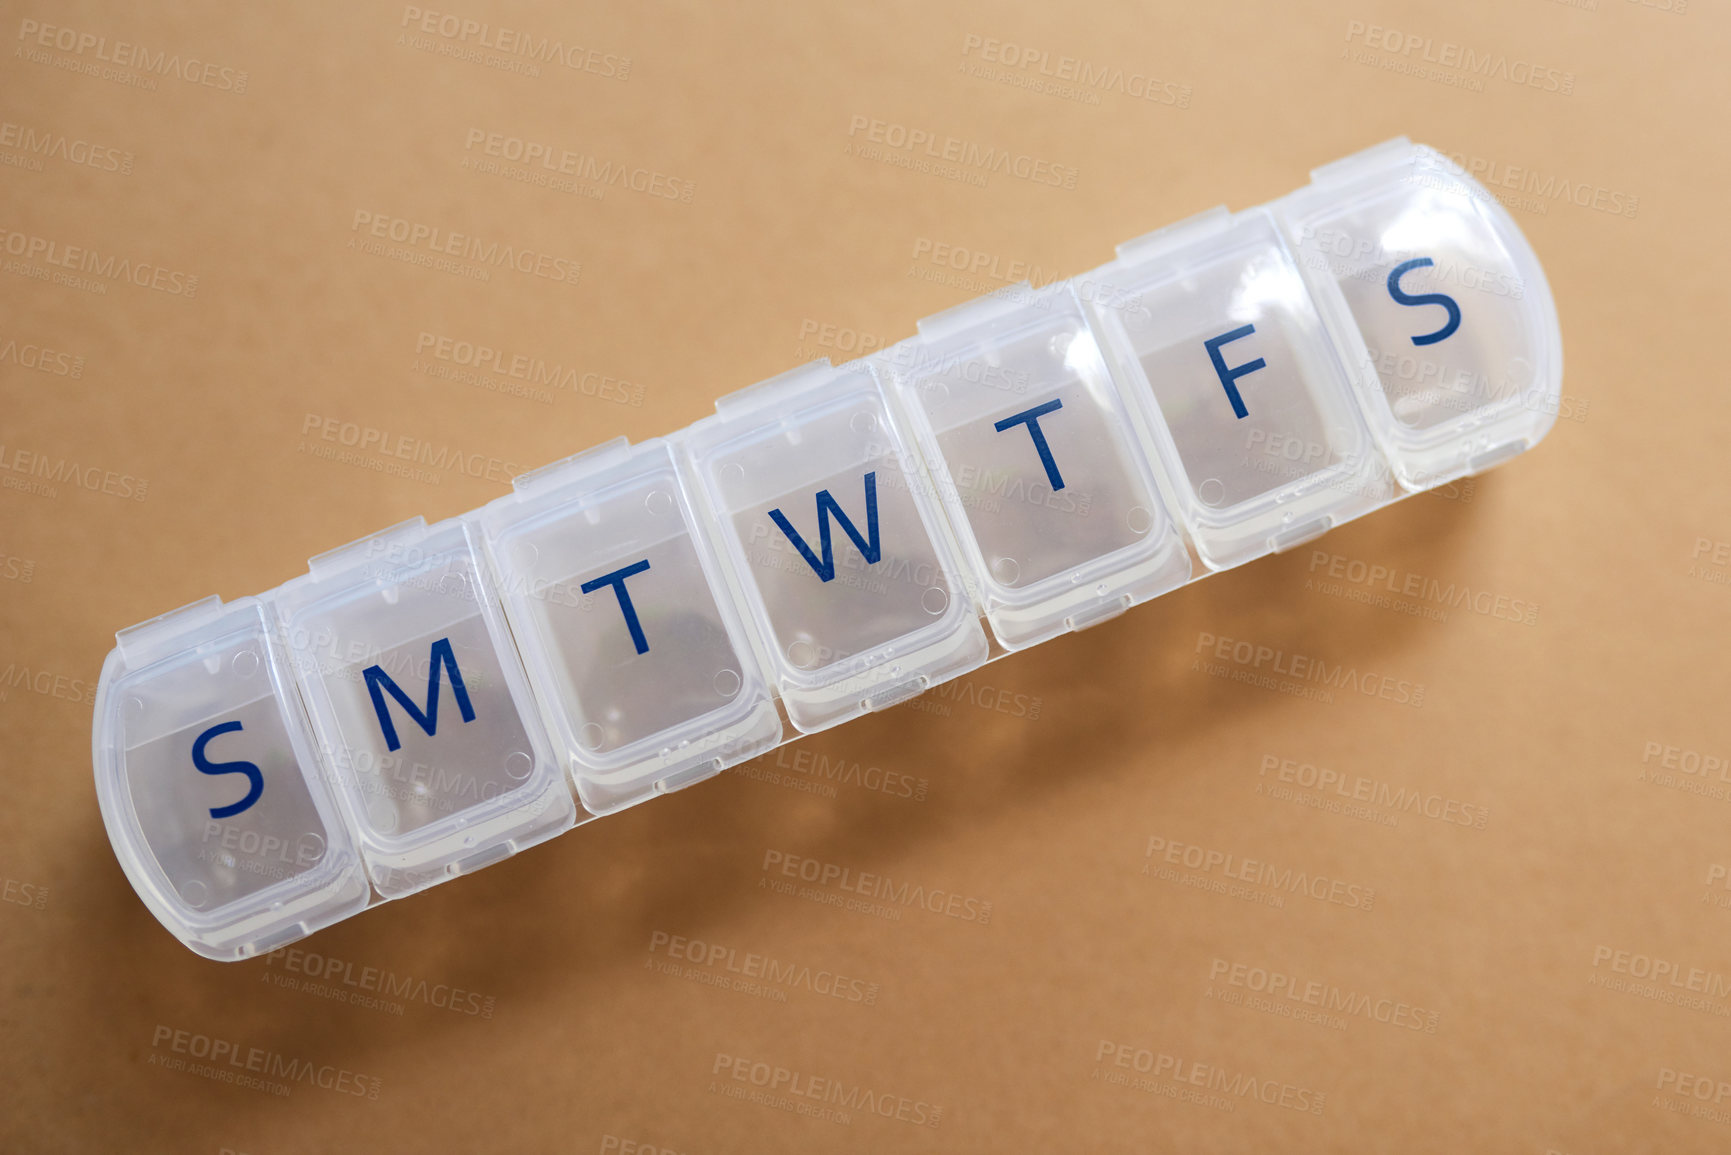 Buy stock photo Studio shot of an empty medicine organizer against a brown background